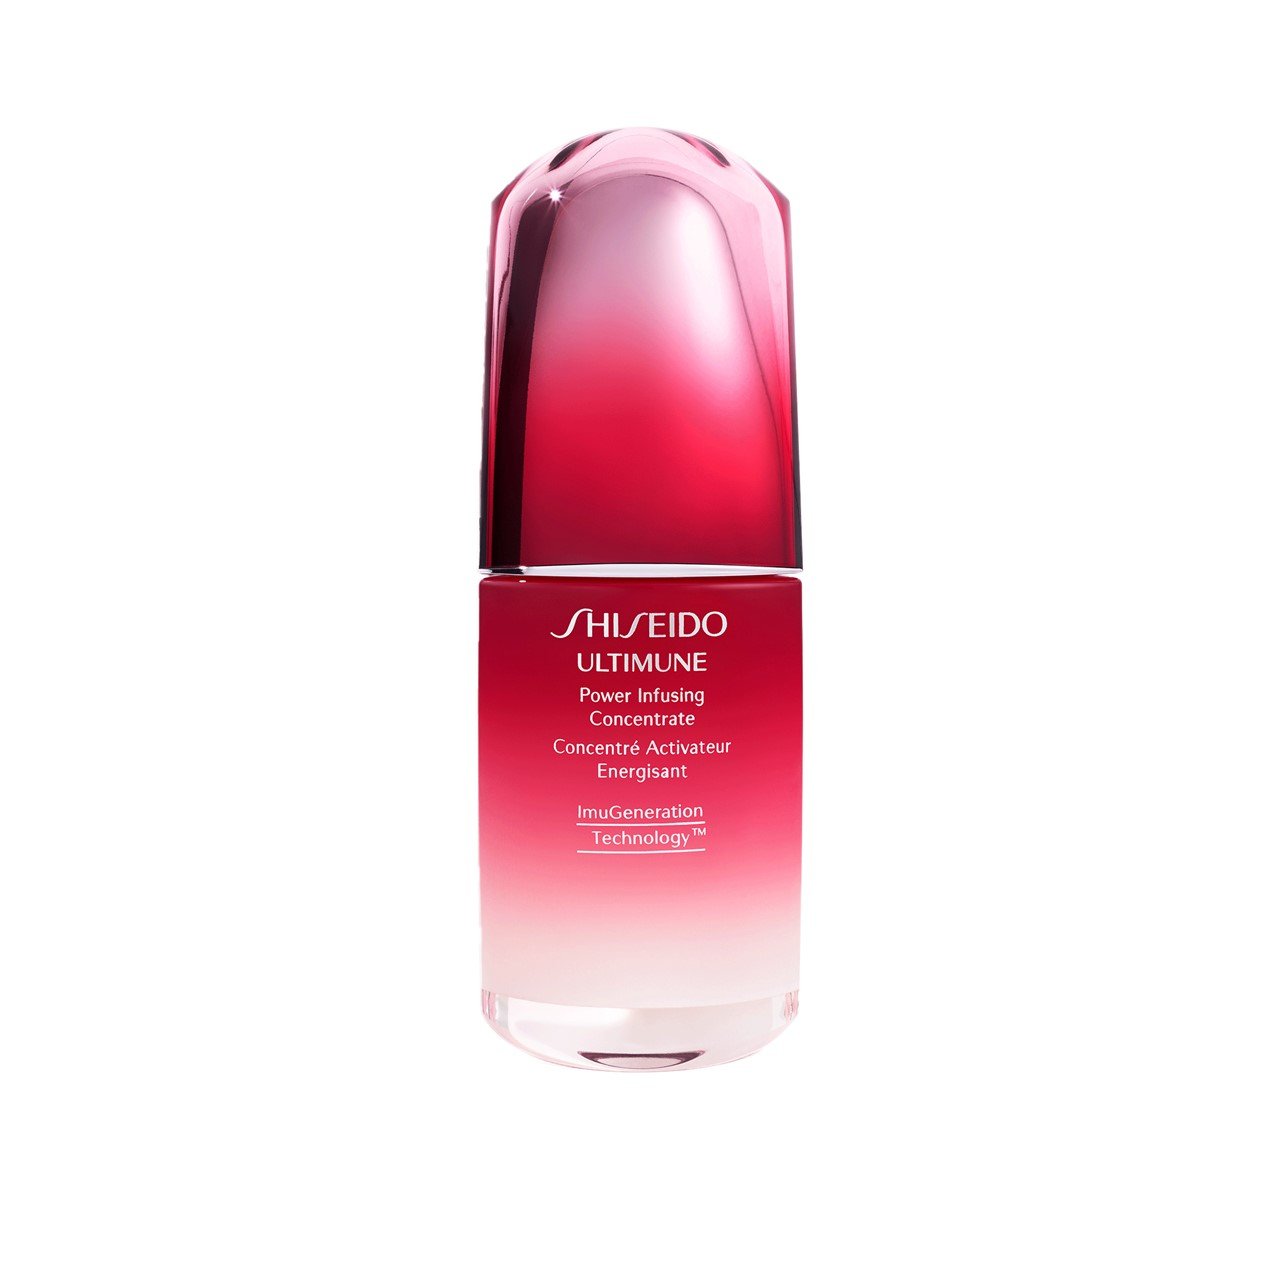 Shiseido ultimune power infusing concentrate. Ultimune концентрат шисейдо. Ultimune концентрат шисейдо Power infusing. Shiseido Ultimune Power infusing Concentrate 50 ml. Shiseido Ultimate Power infusing Concentrate.